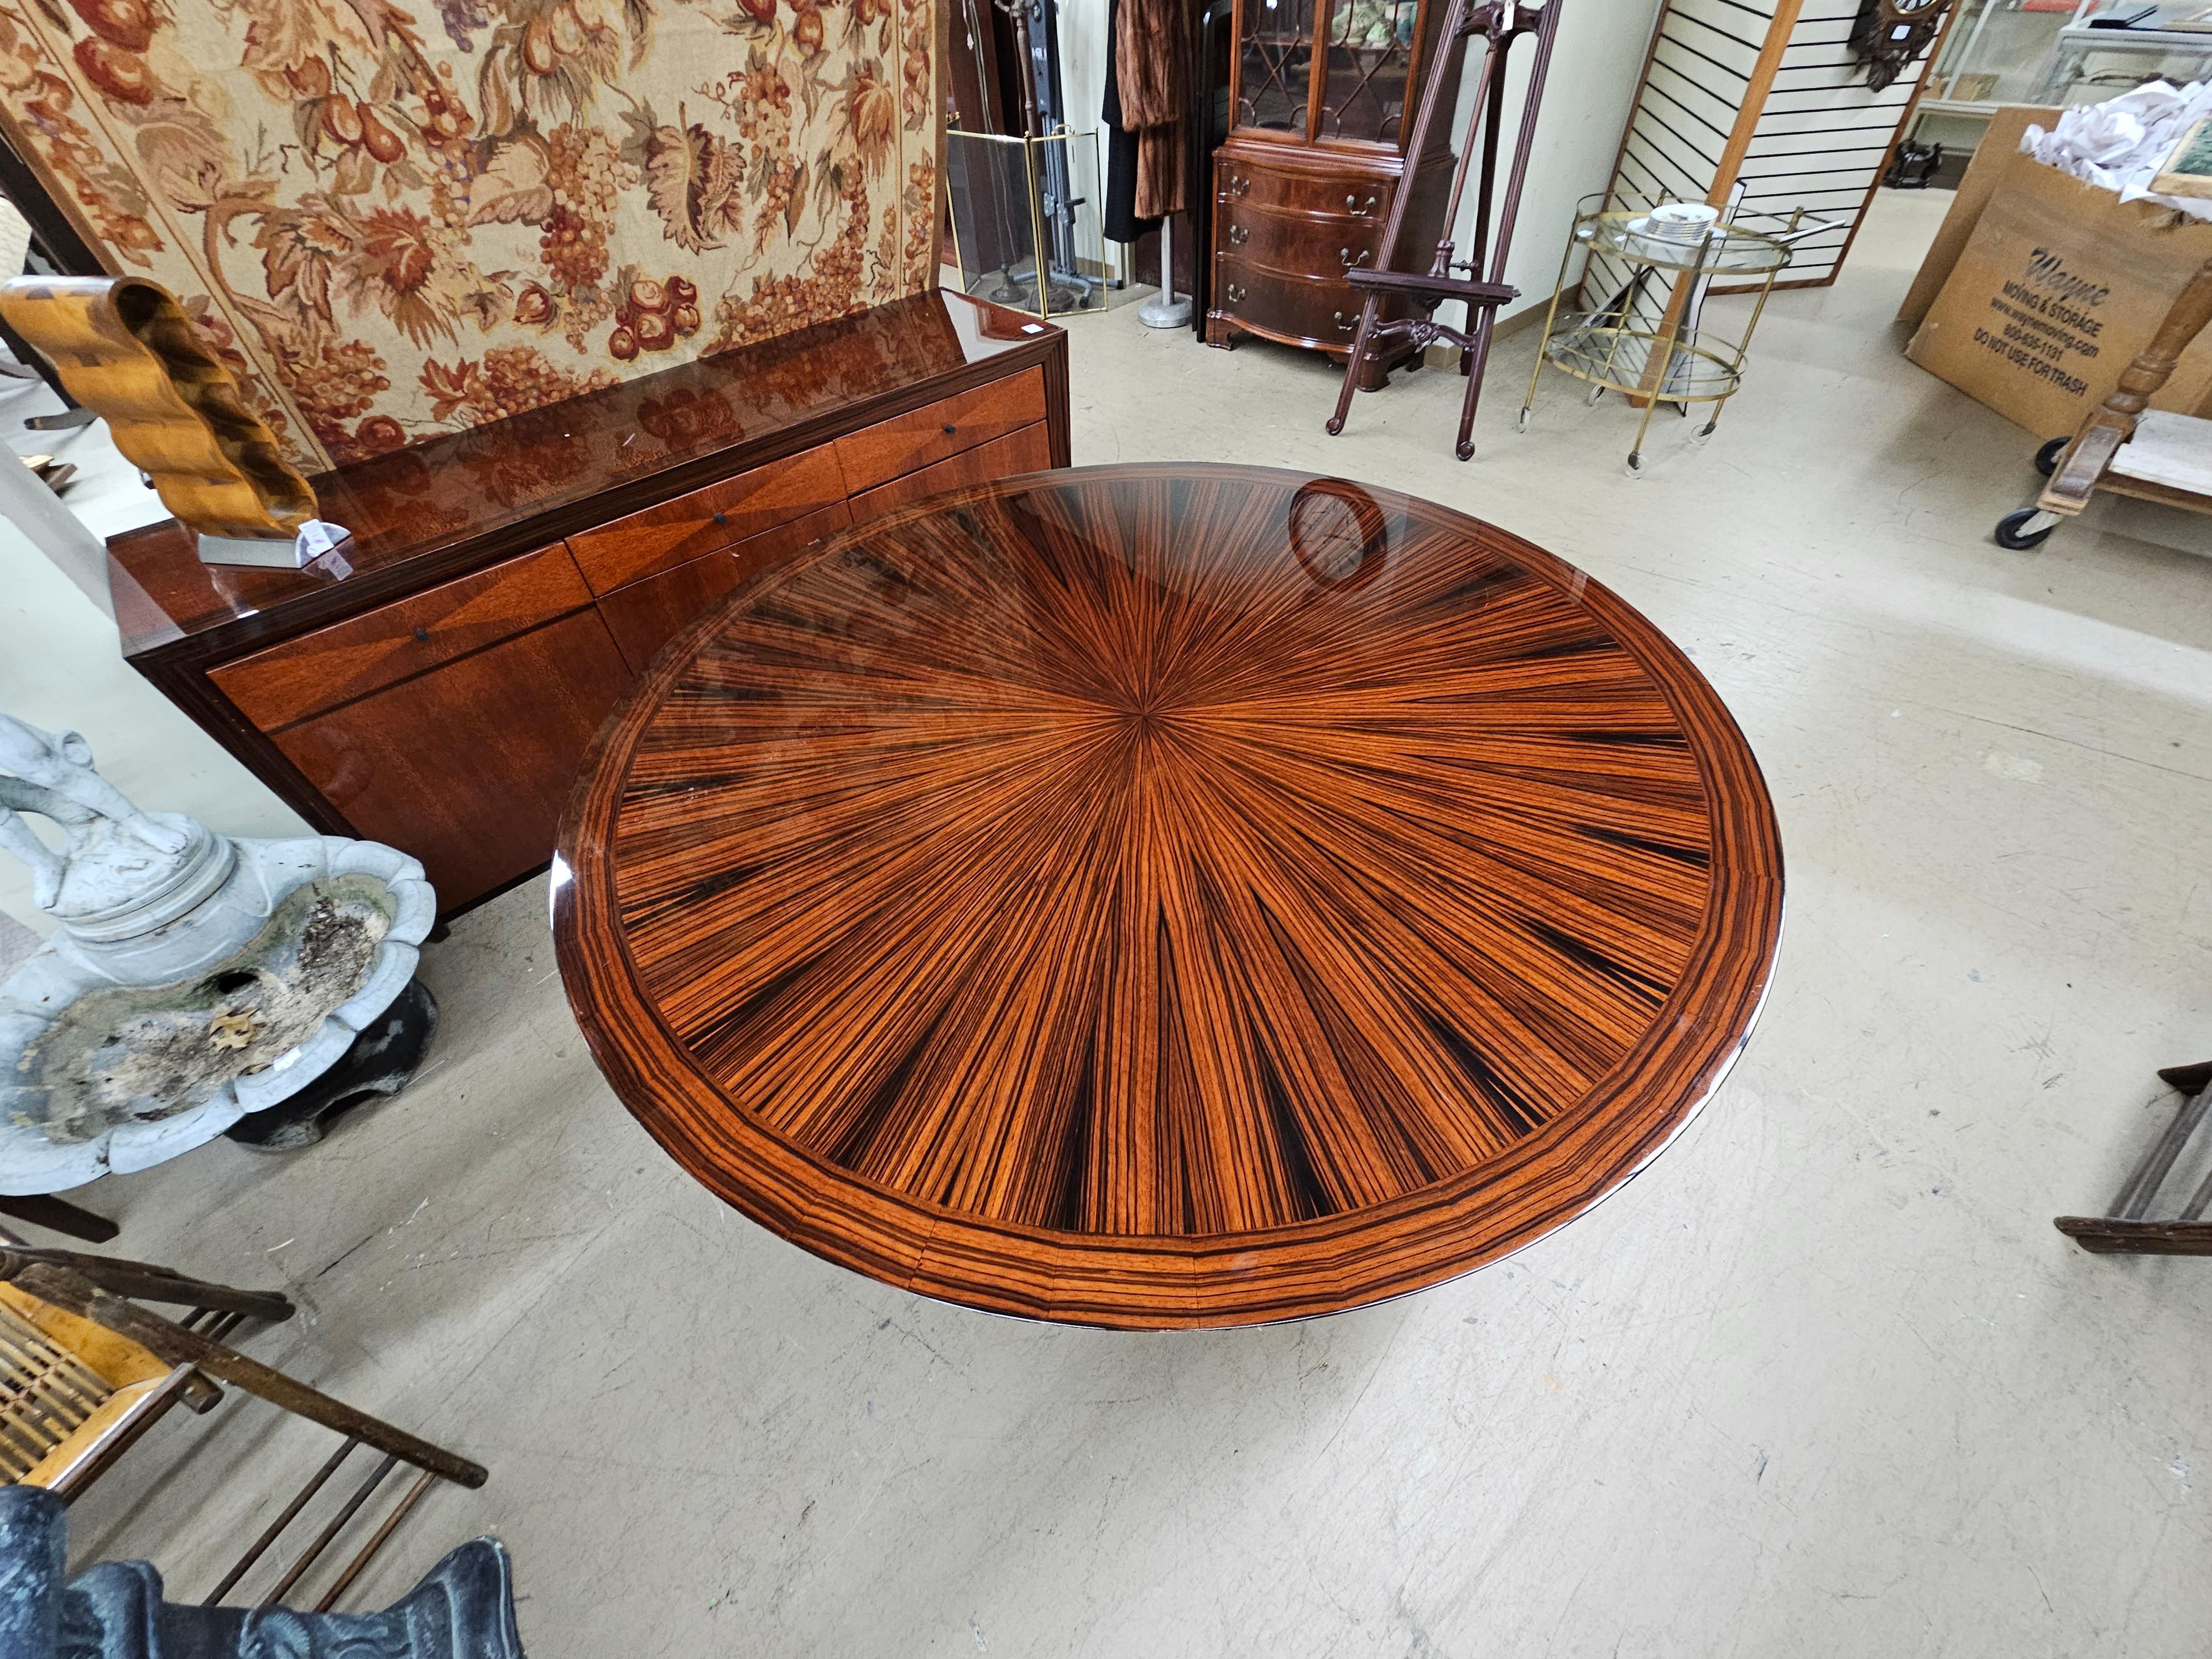 Wood Dakota Jackson Heraldic Collection Mixed Rosewood and Ebony Round Dining Table For Sale